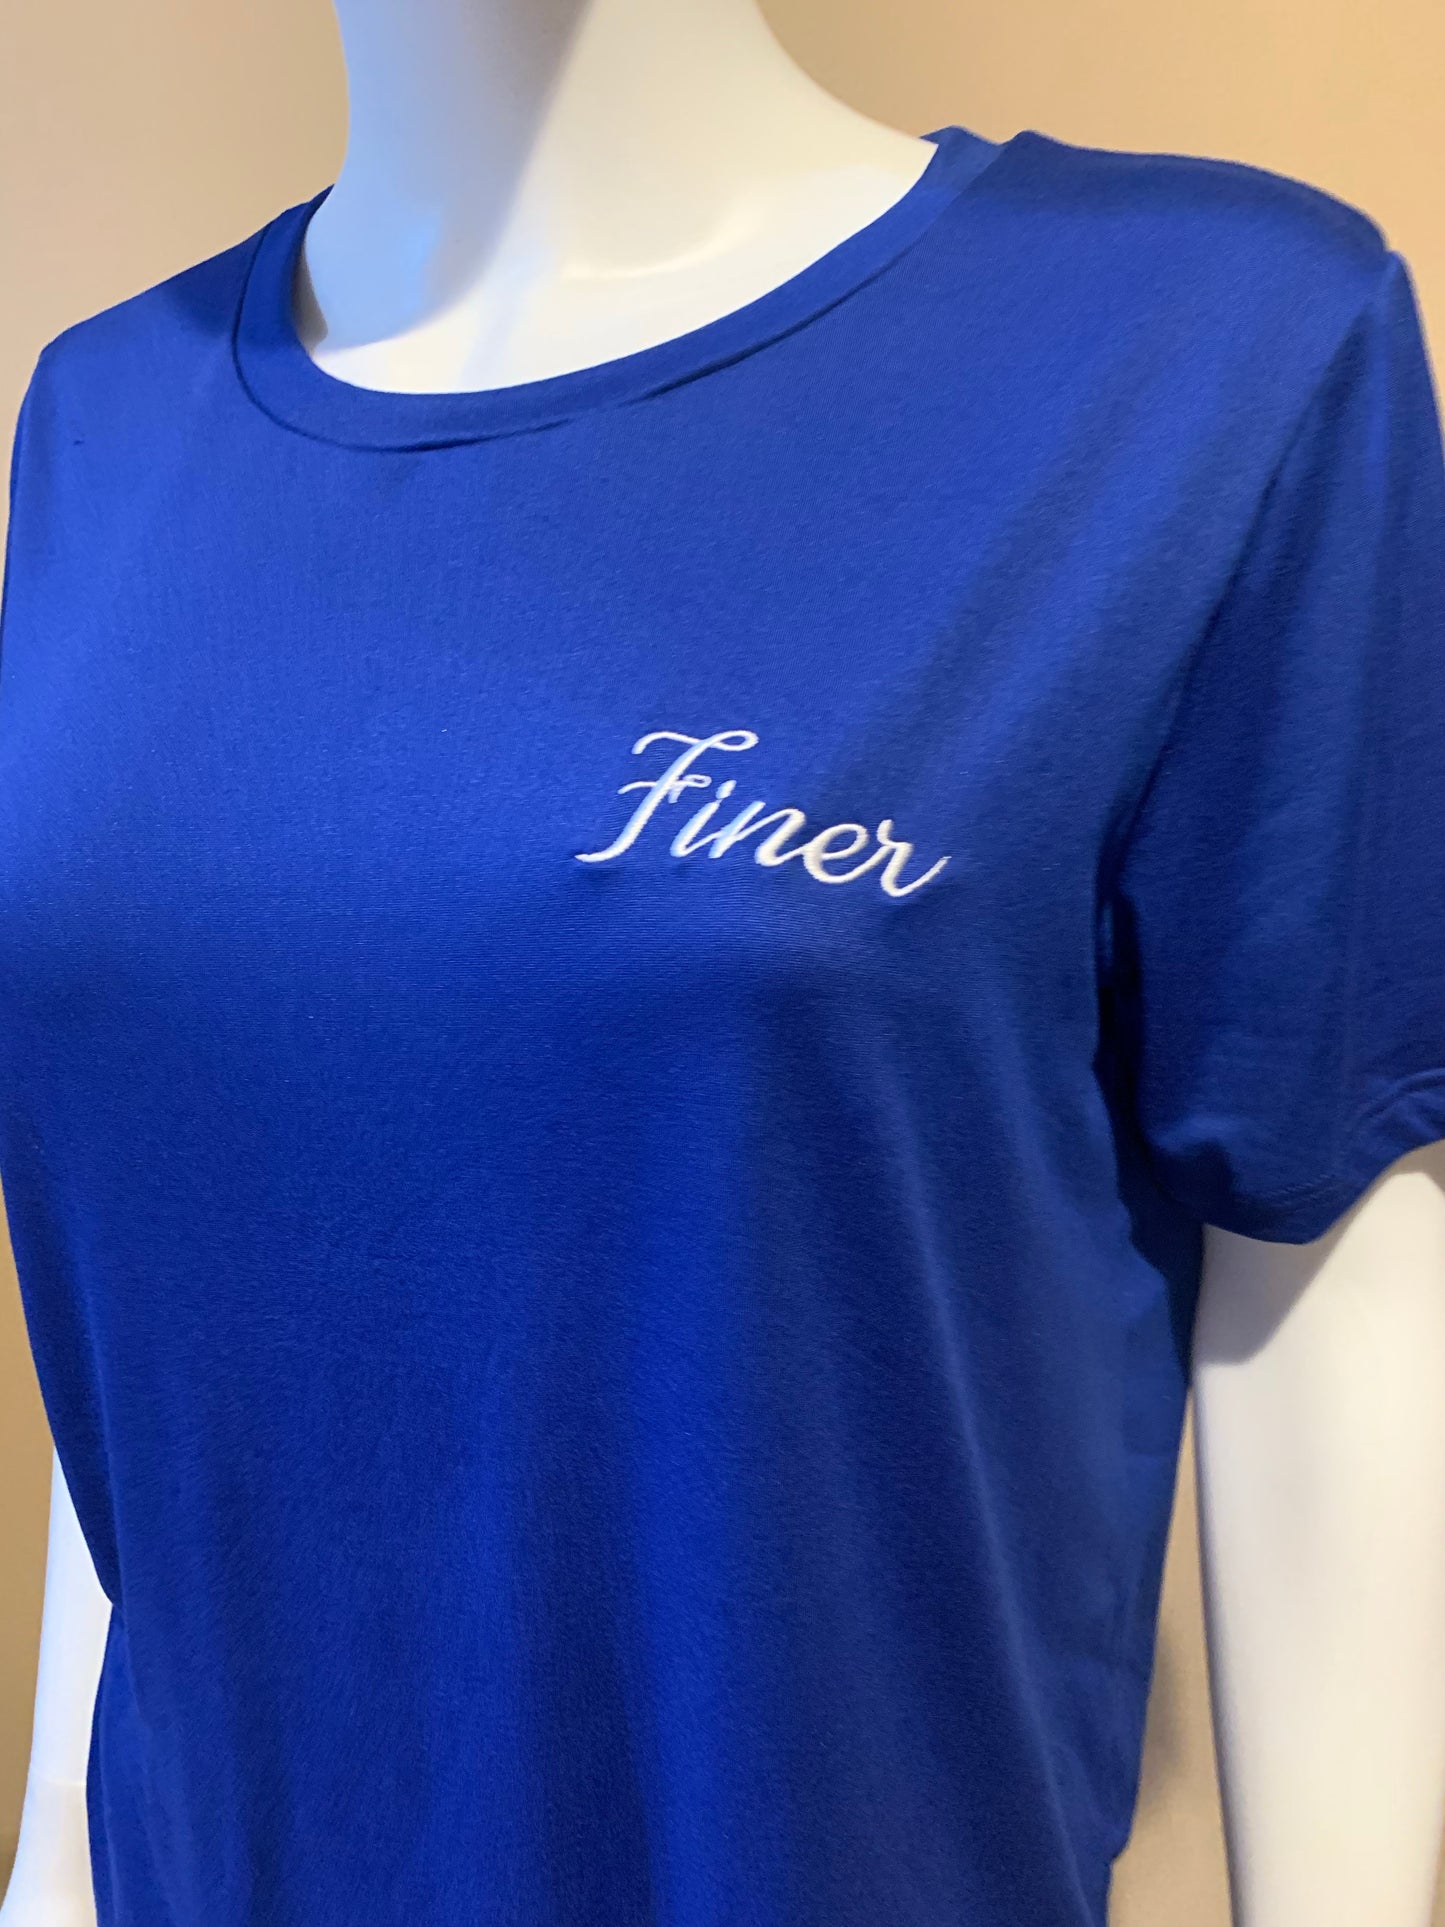 Plus Finer Biker short set round neck available in royal blue with white writing and black with royal blue writing